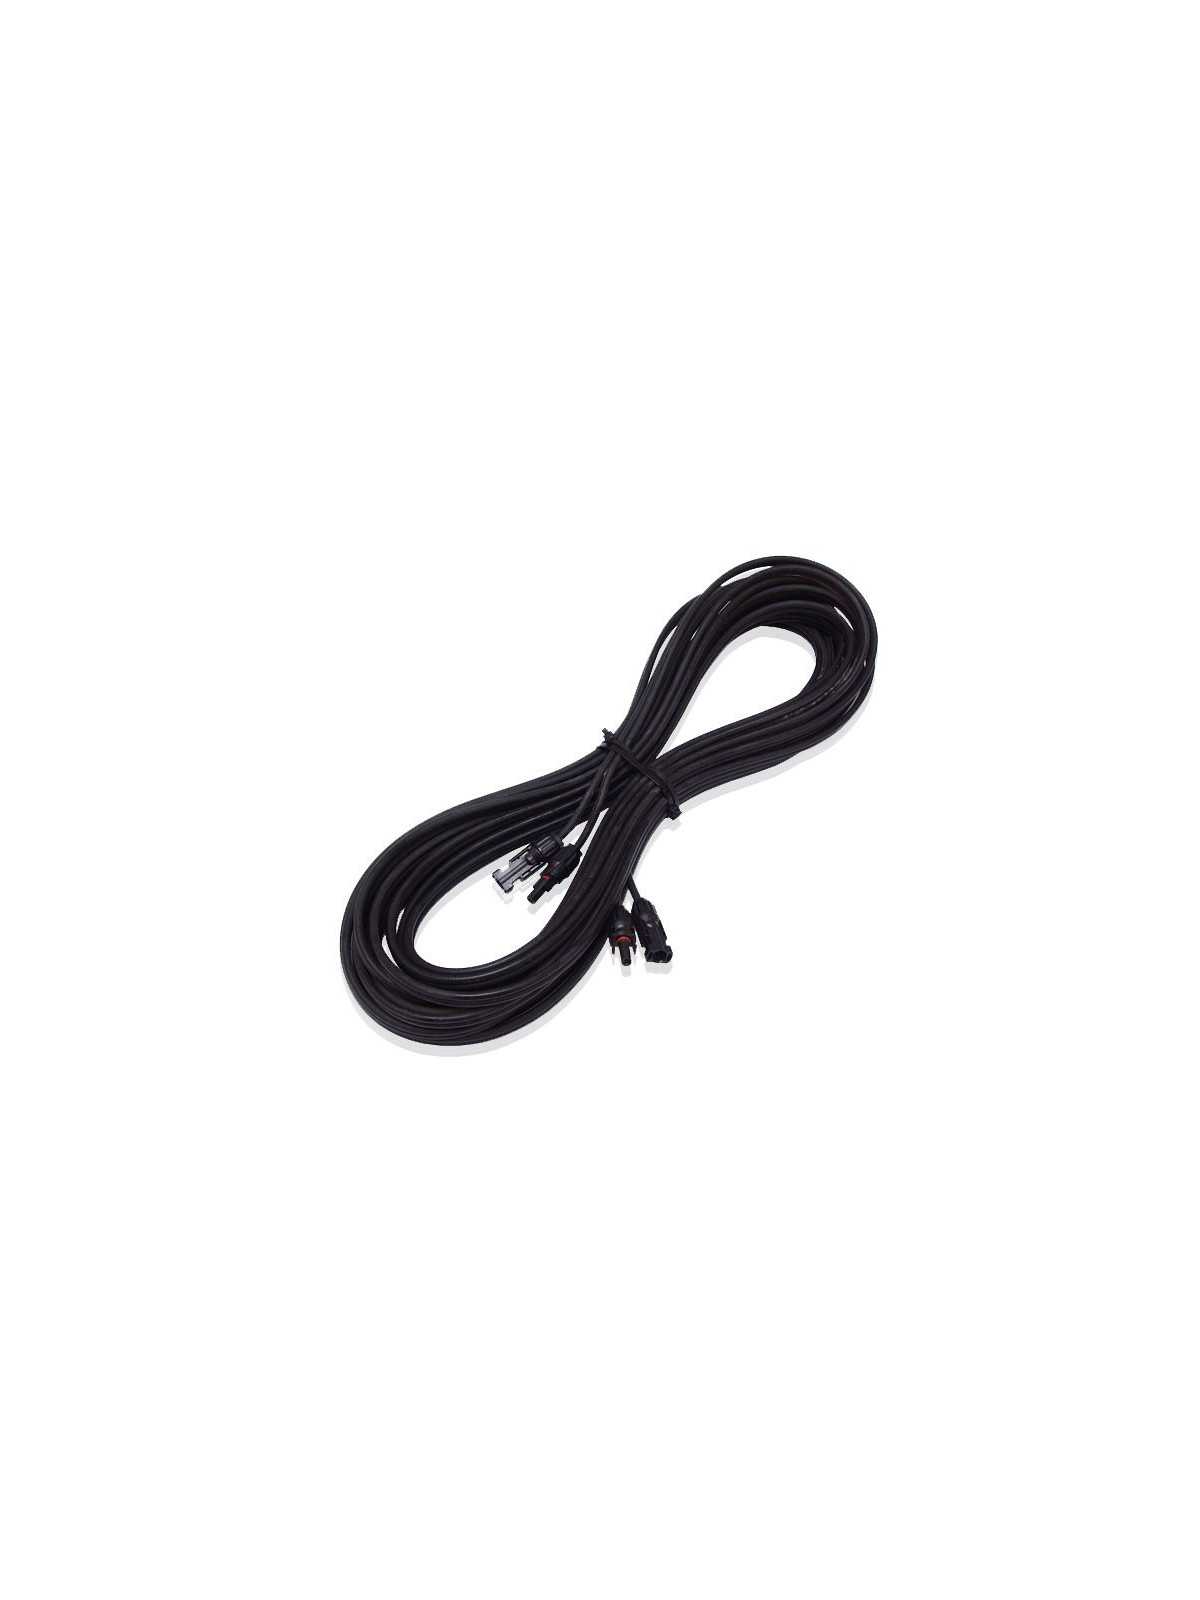 H07V-K 70mm² flexible cable